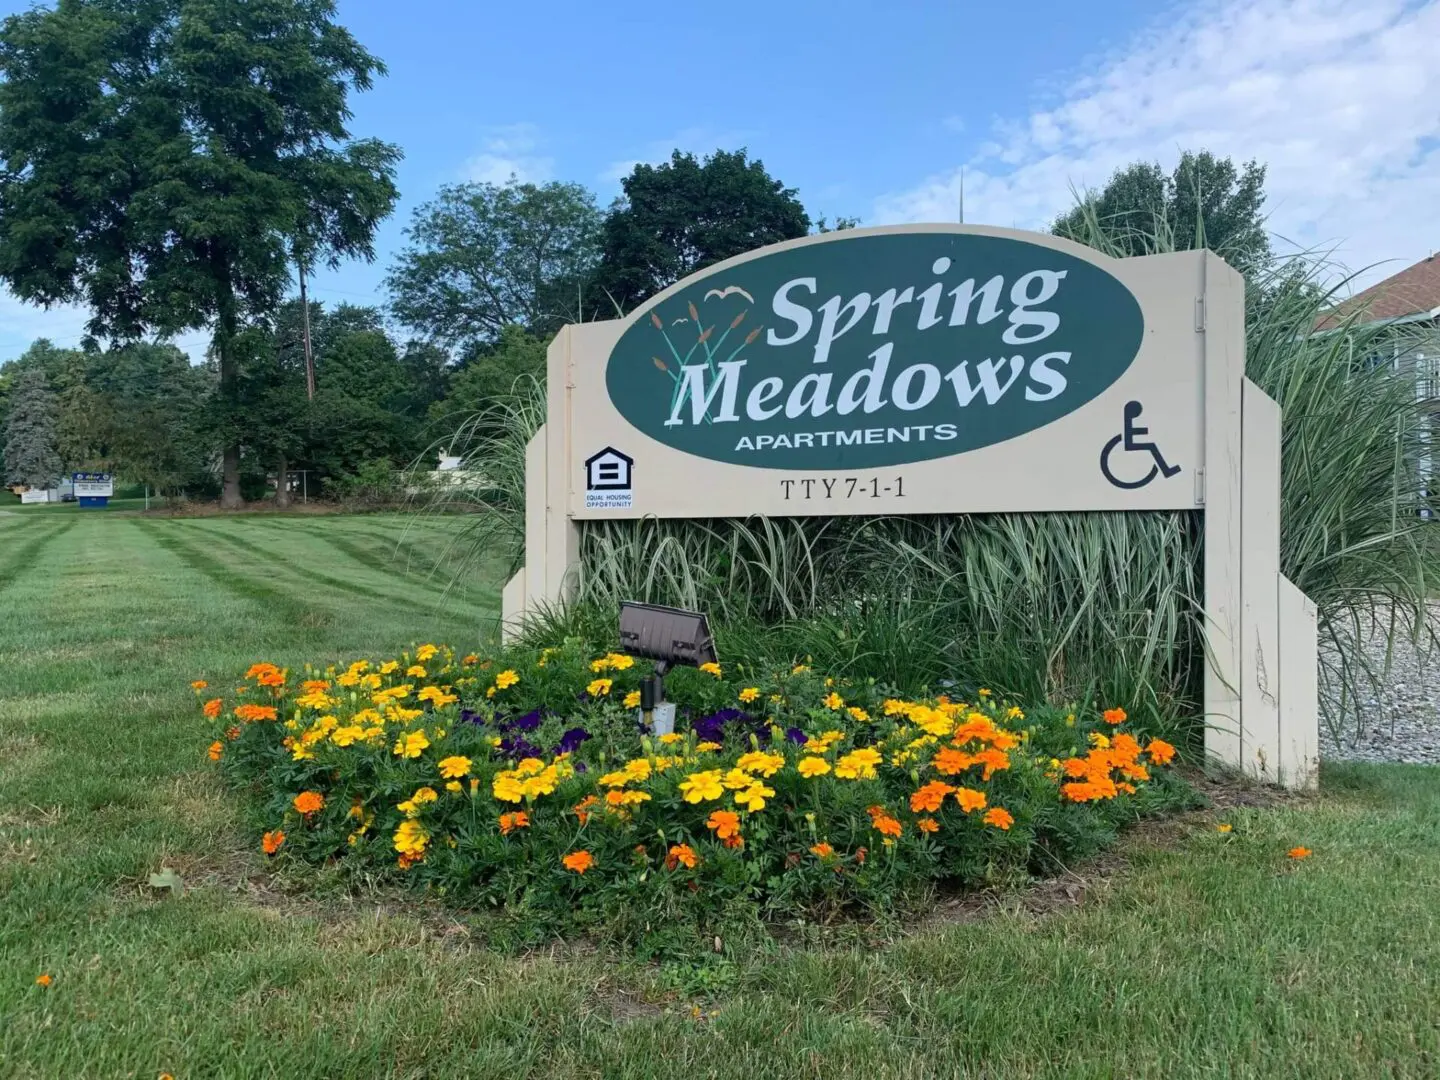 Spring Meadows Apartments TTY 711